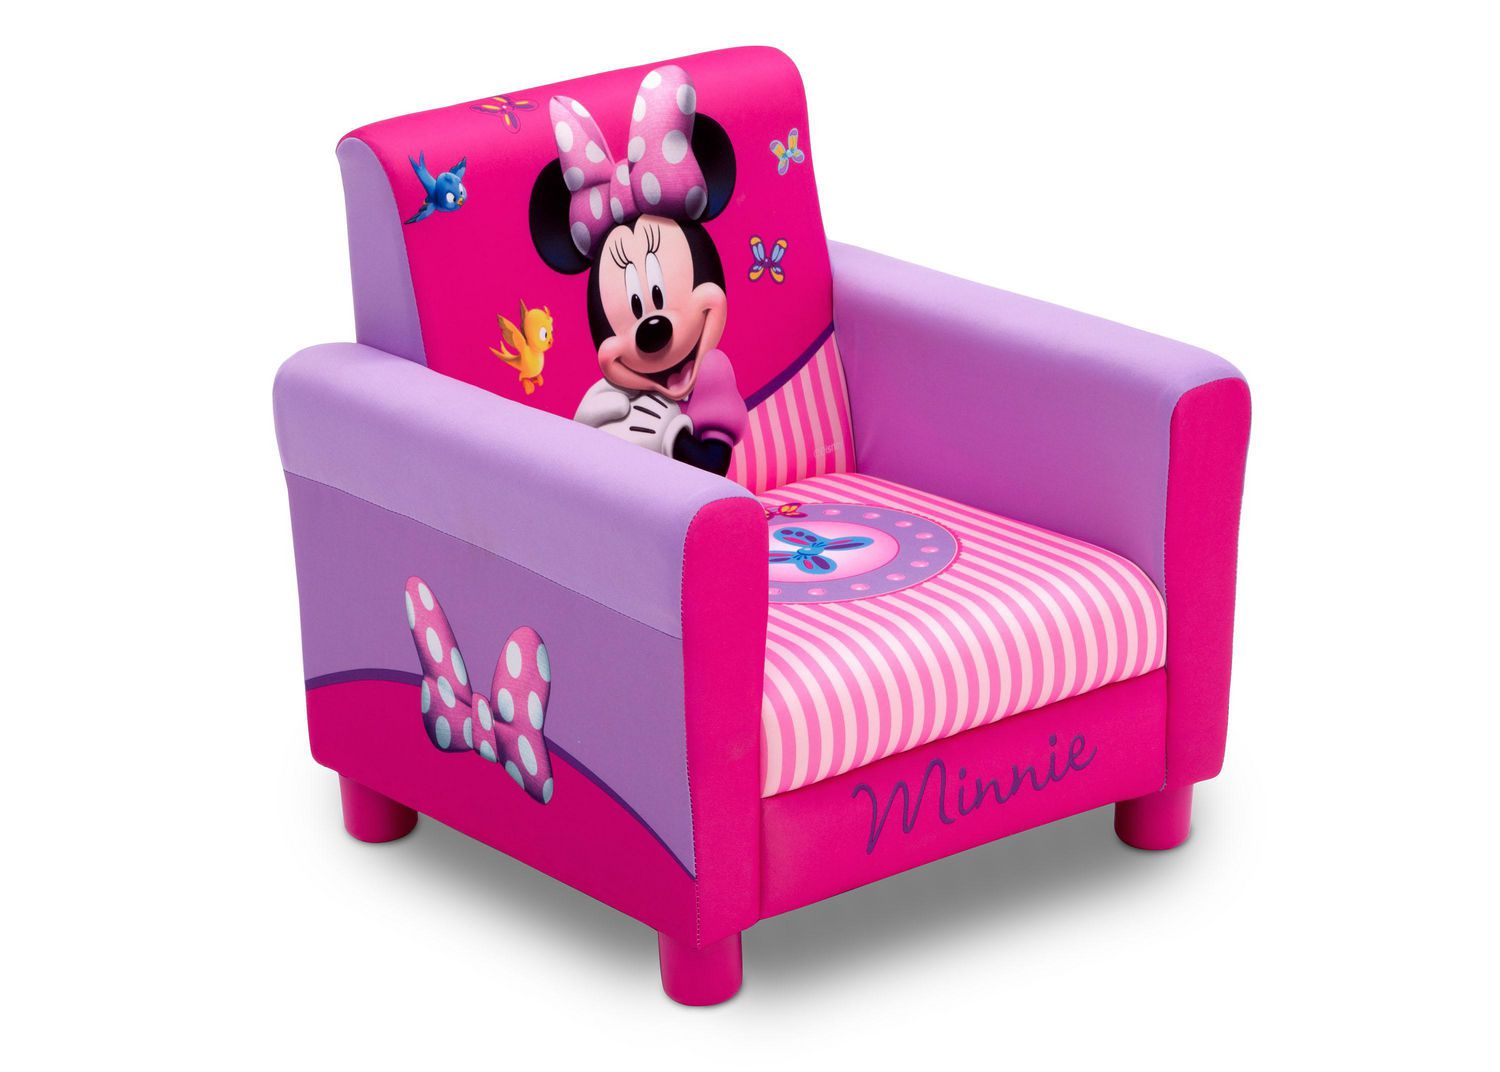 Disney Minnie Mouse Upholstered Chair, Minnie Mouse Upholstered Chair Canada